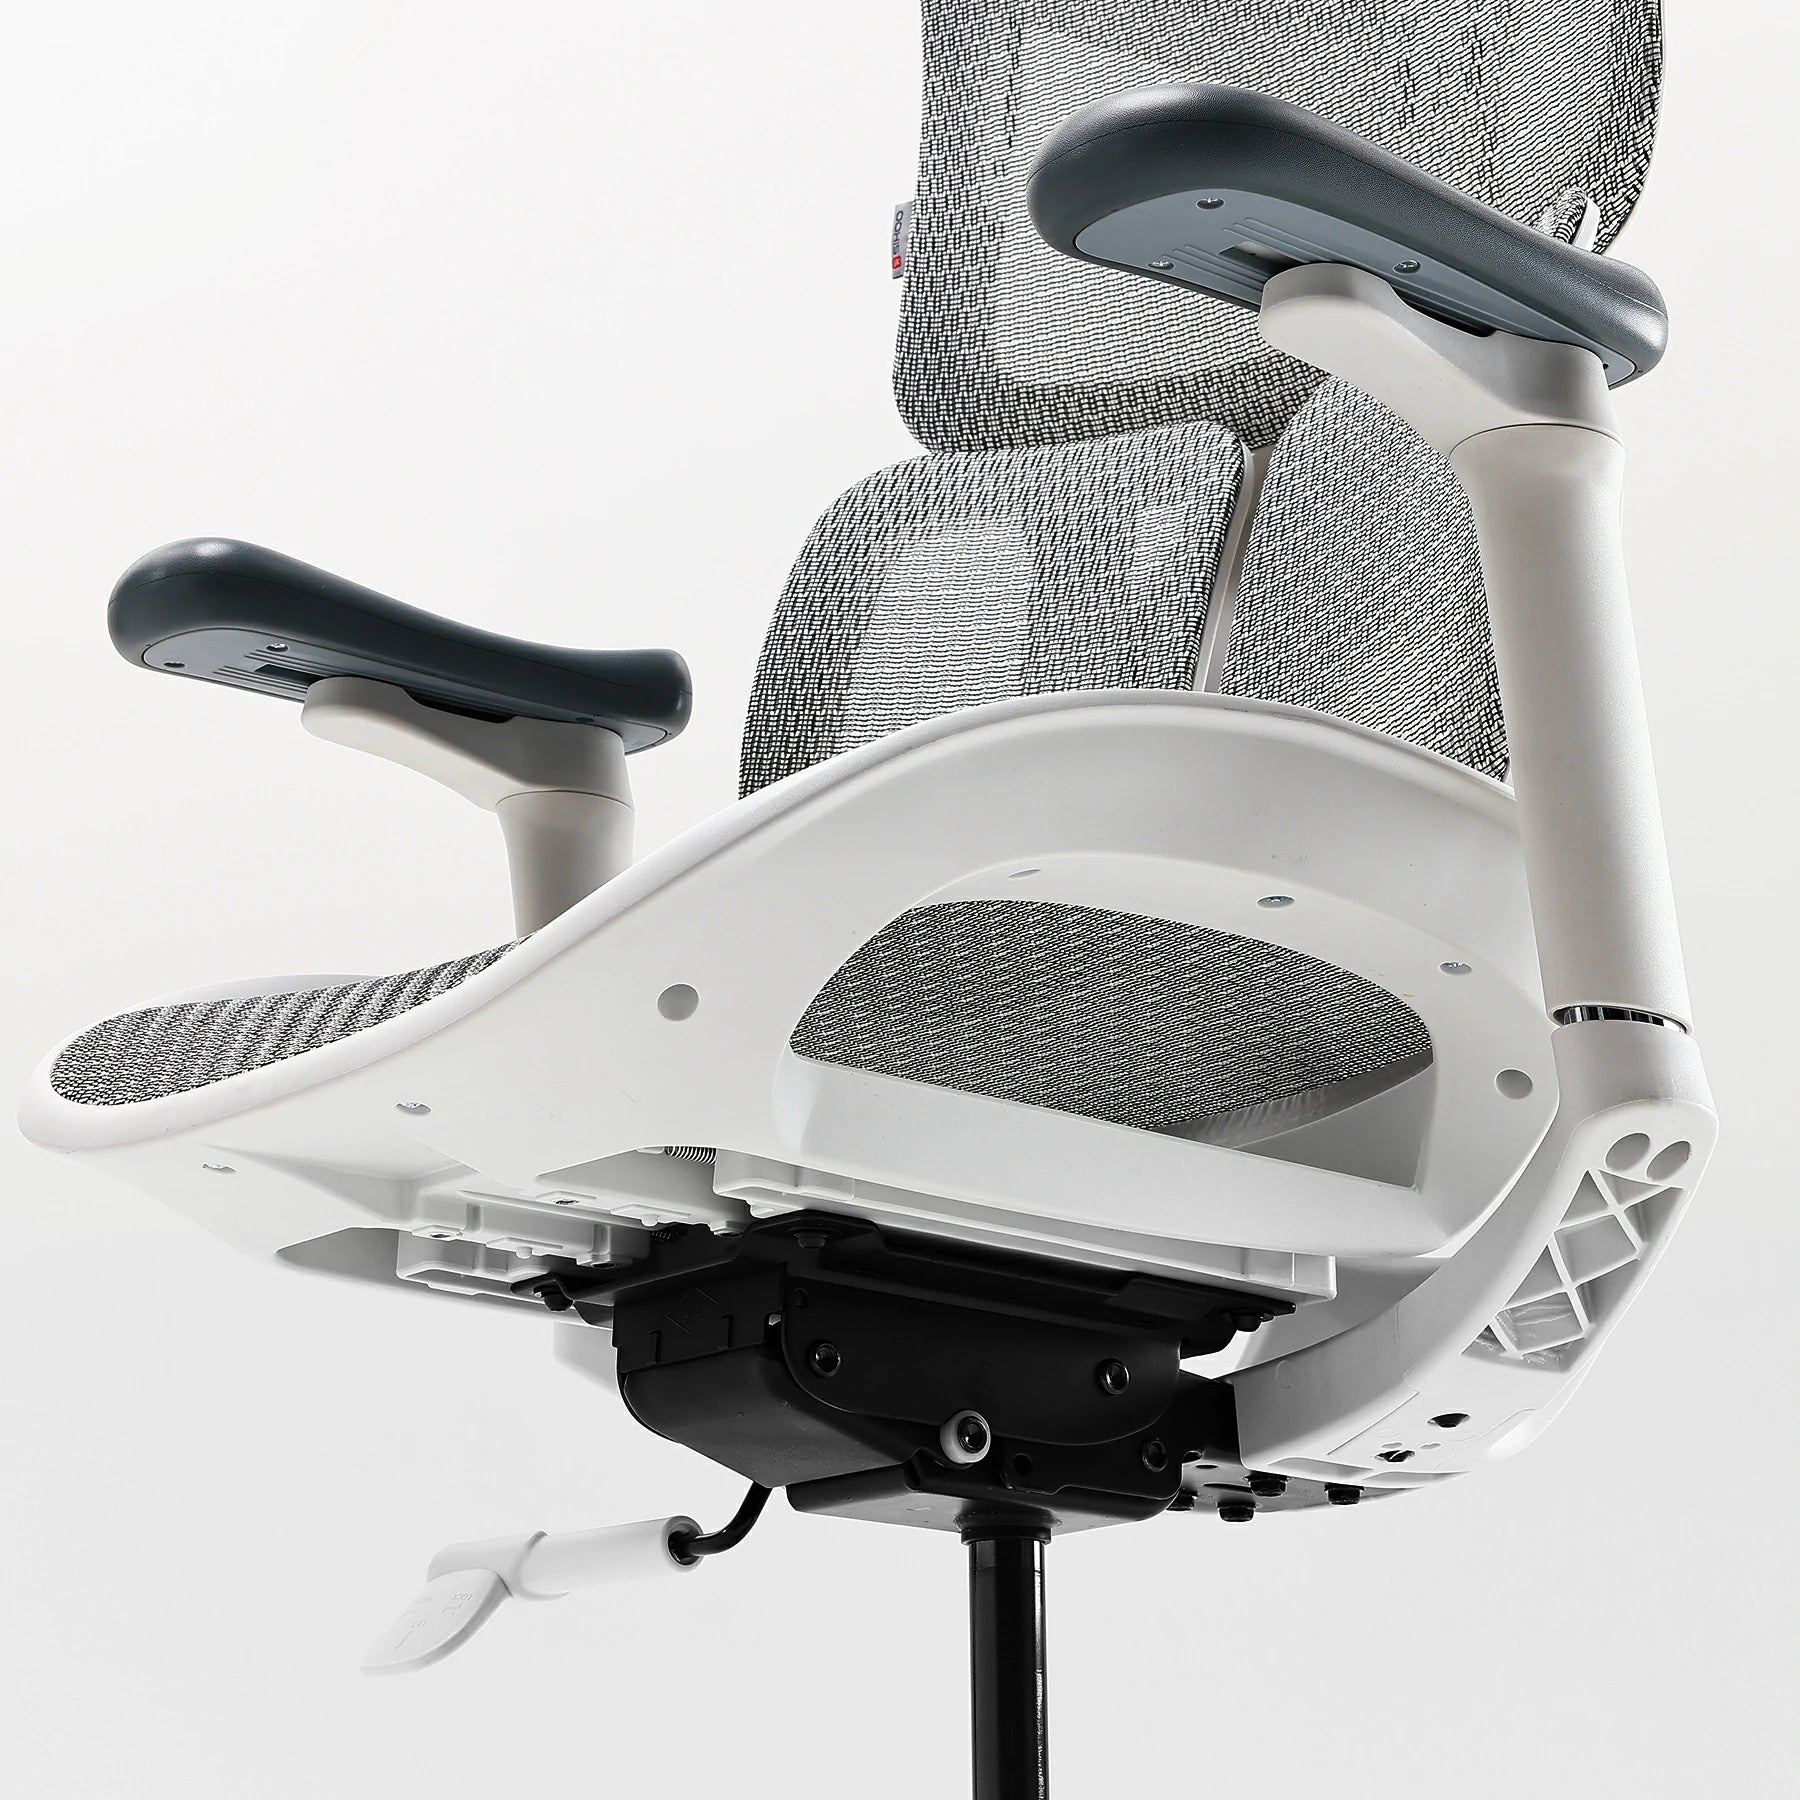 (NEW) Sihoo Doro S100 Ergonomic Office Chair with Dual Dynamic Lumbar Support